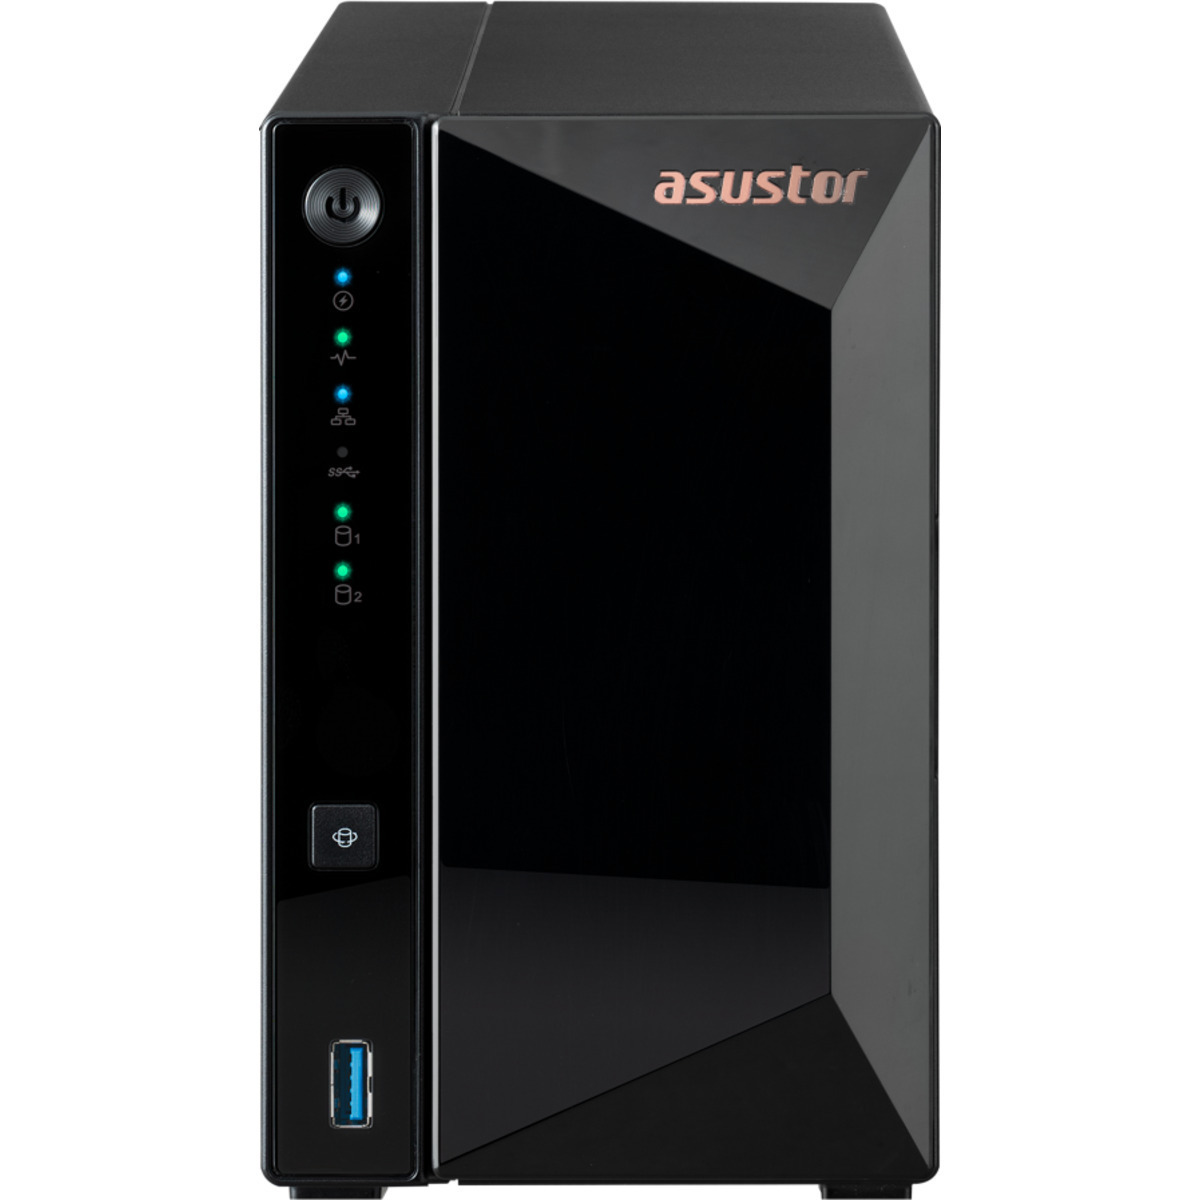 ASUSTOR DRIVESTOR 2 Pro Gen2 AS3302T v2 28tb 2-Bay Desktop Personal / Basic Home / Small Office NAS - Network Attached Storage Device 2x14tb Seagate IronWolf Pro ST14000NT001 3.5 7200rpm SATA 6Gb/s HDD NAS Class Drives Installed - Burn-In Tested - ON SALE DRIVESTOR 2 Pro Gen2 AS3302T v2